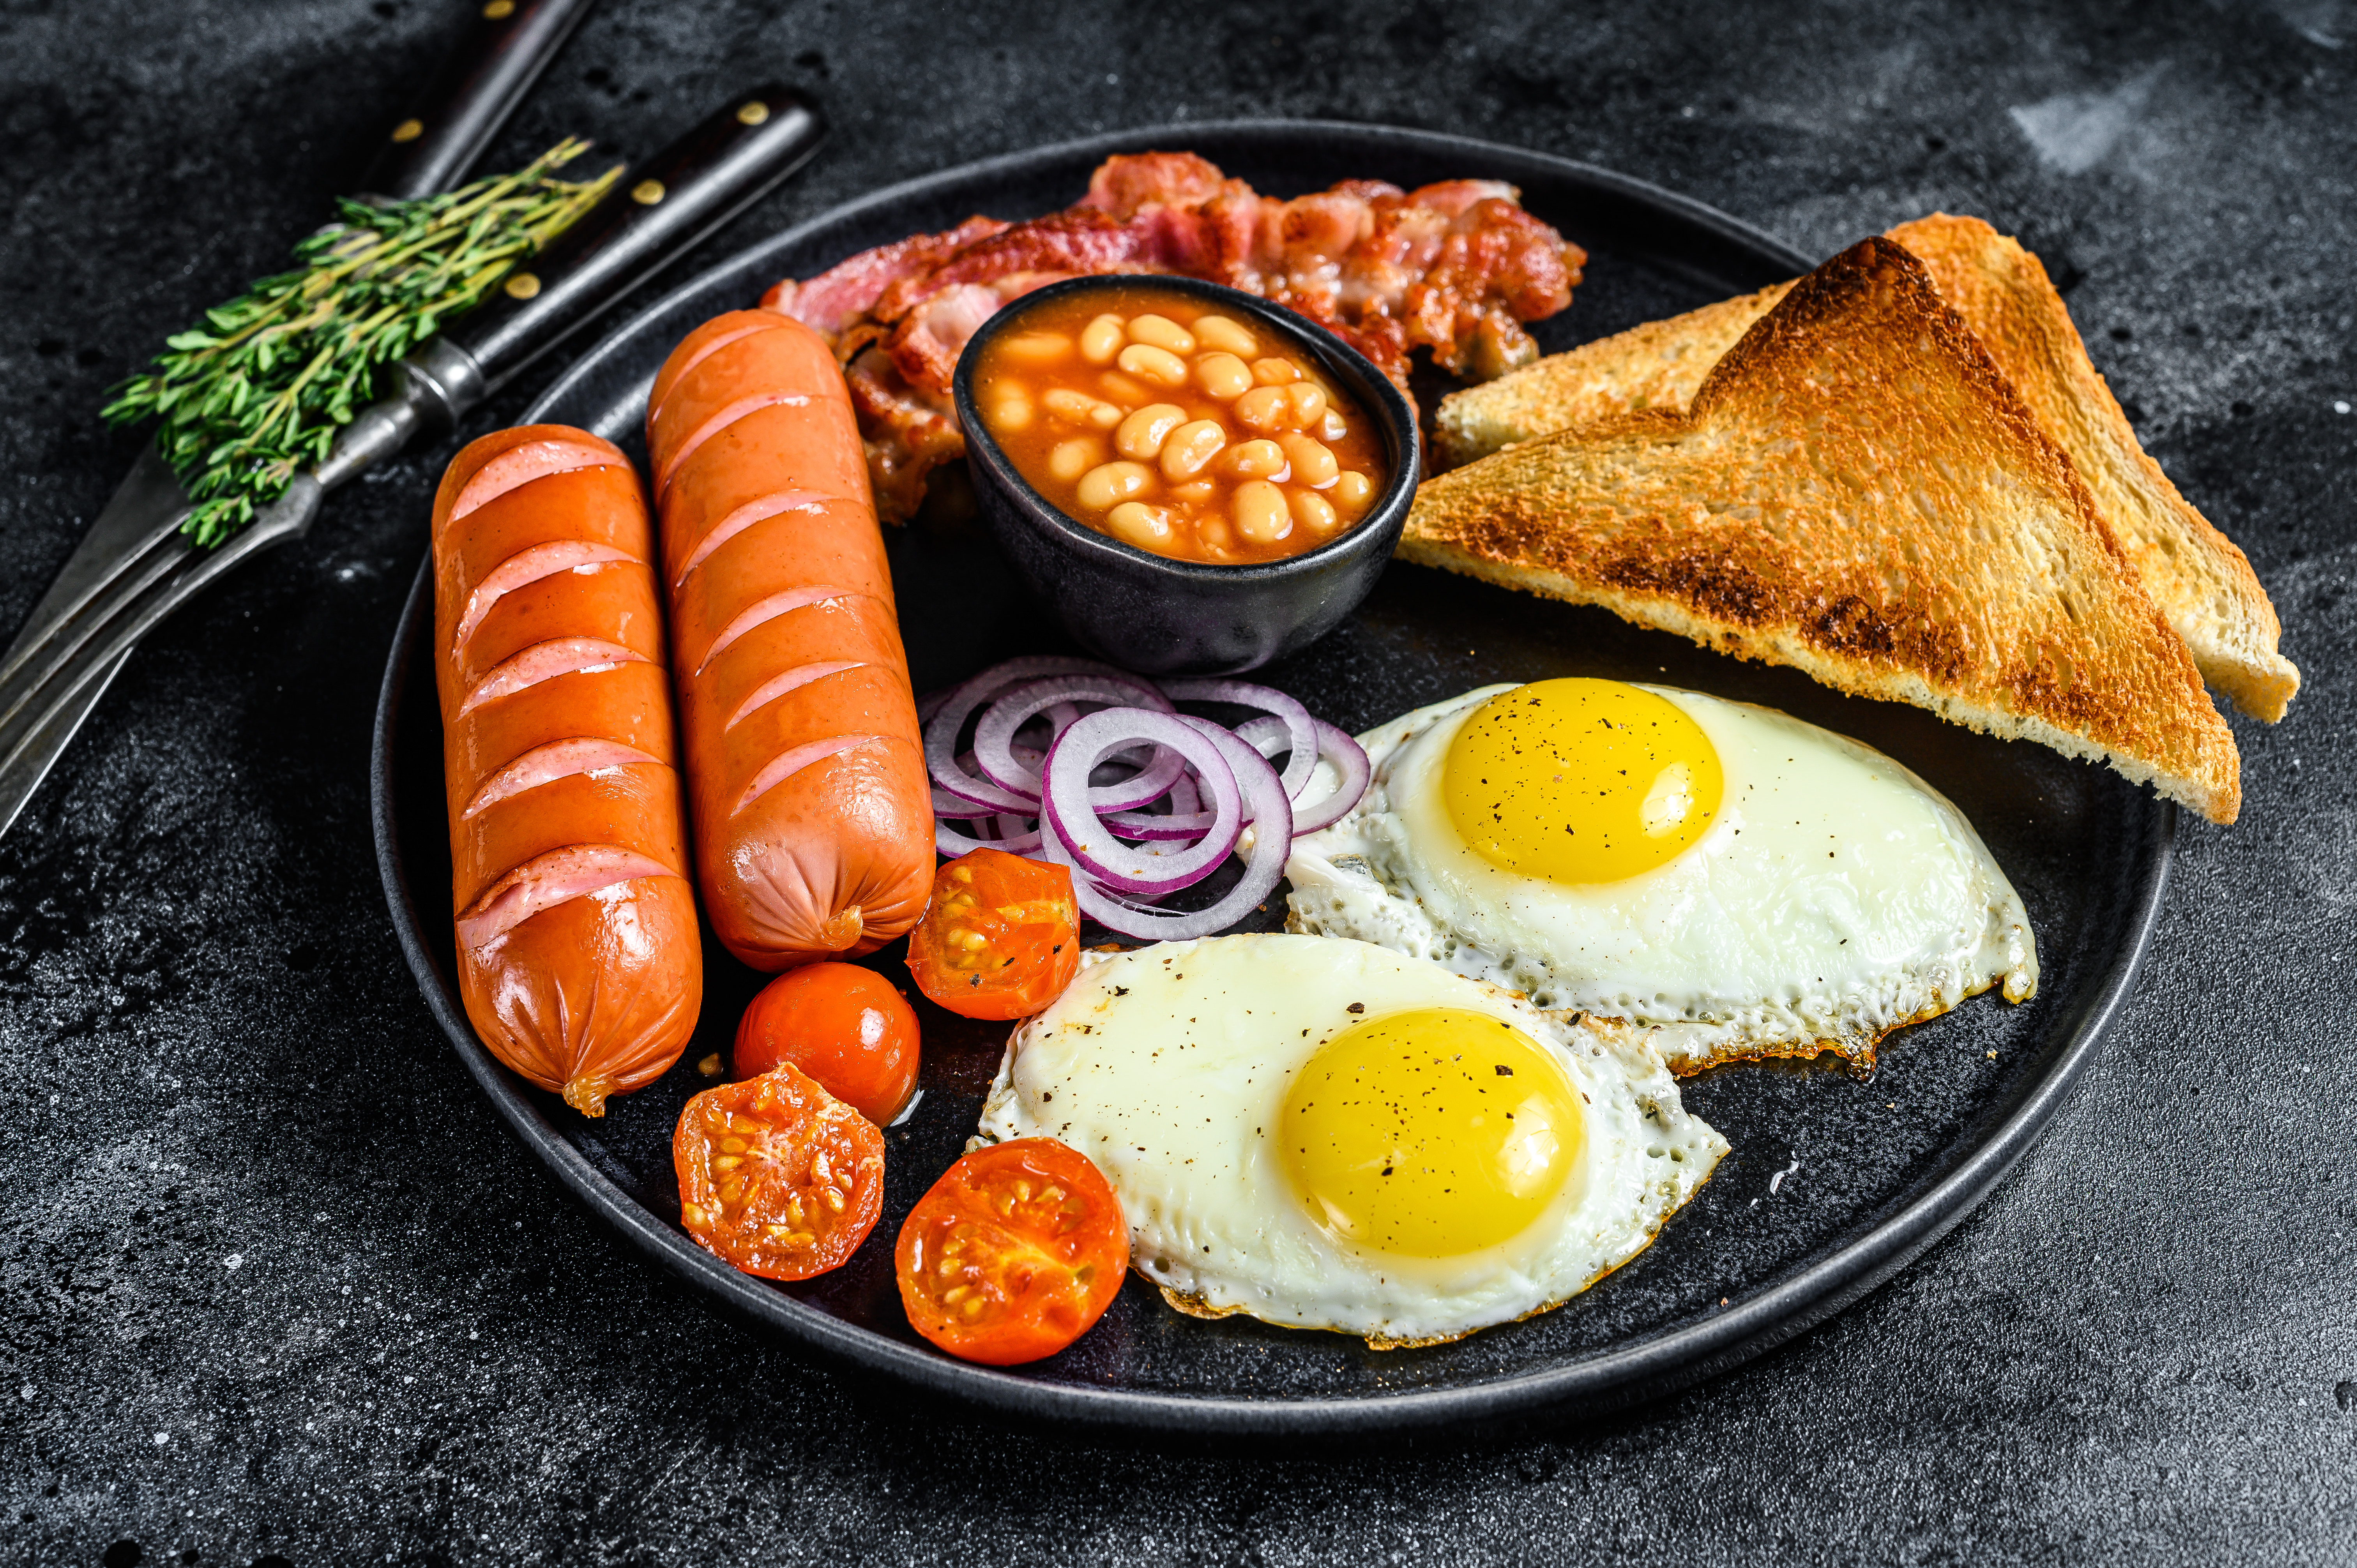 English breakfast with fried eggs, sausages, bacon, beans and toasts in a plate.